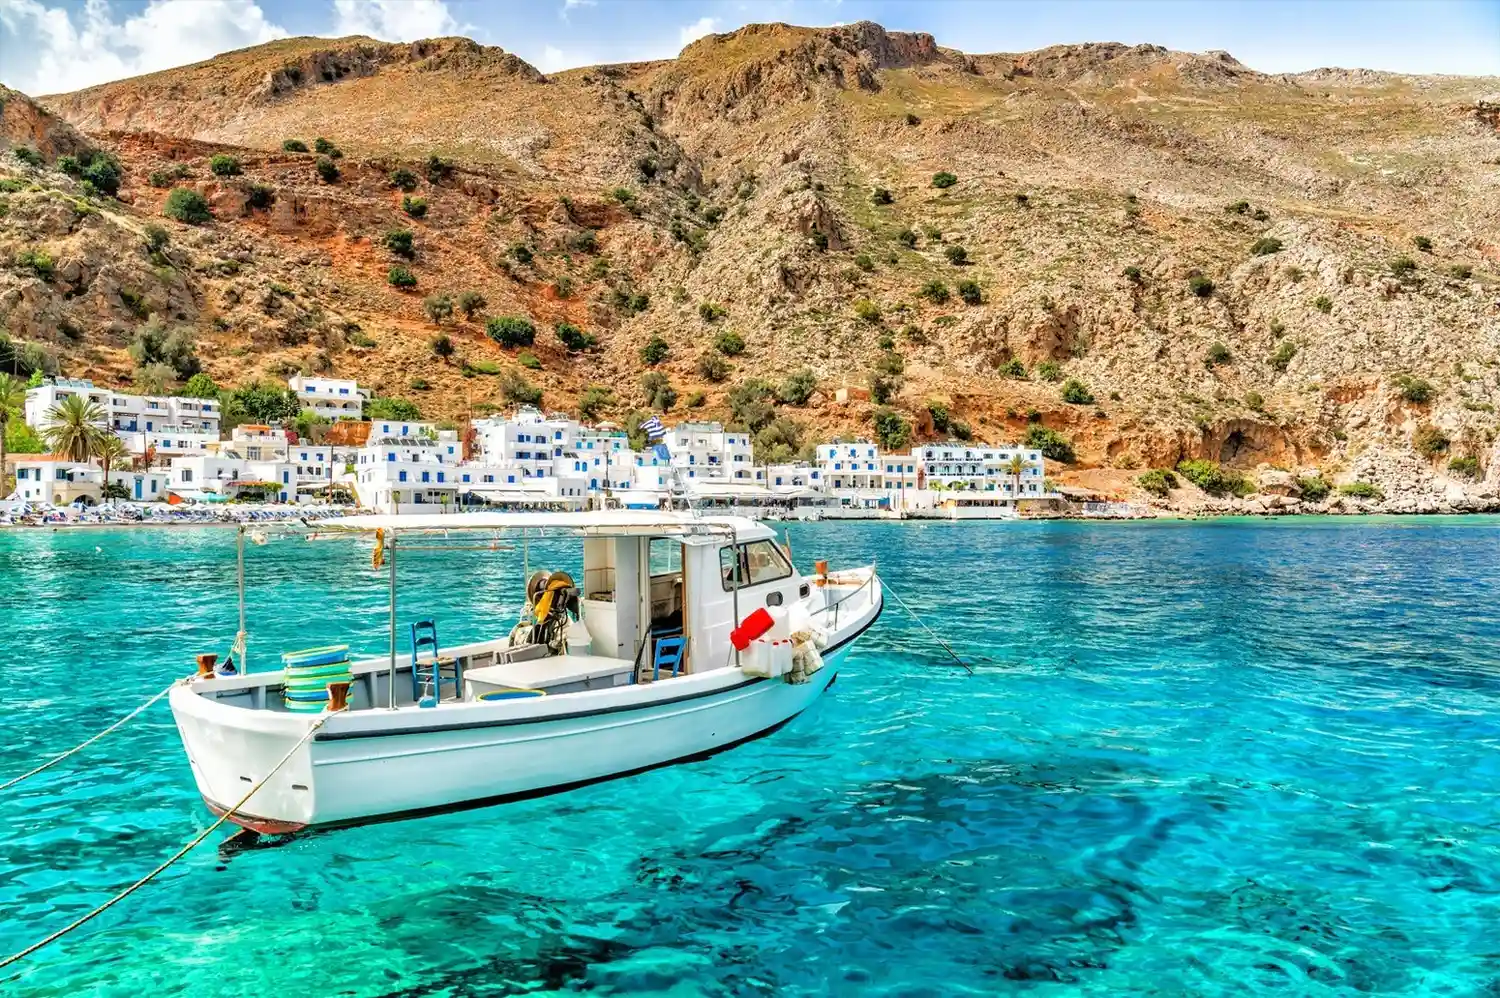 Crete's towns and beaches